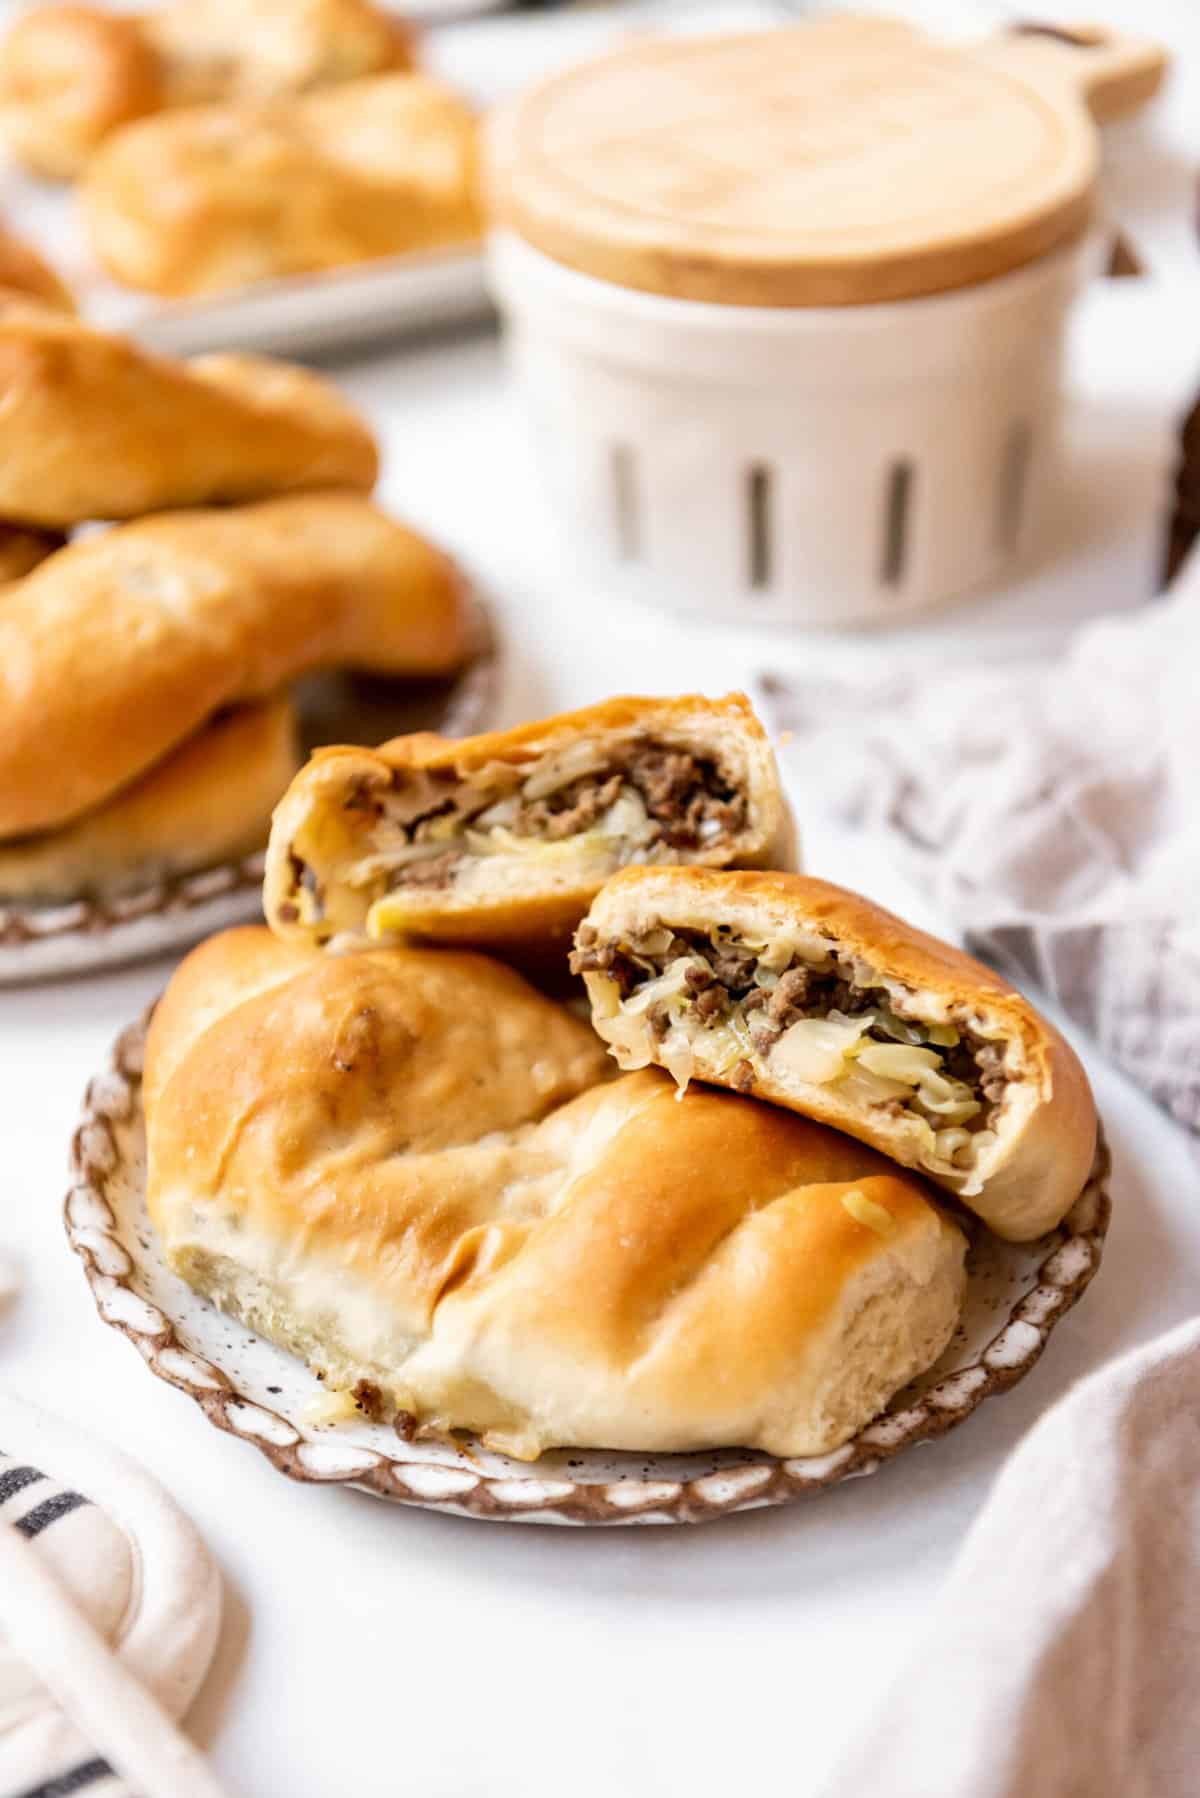 A plate of homemade runzas with beef and cabbage filling.